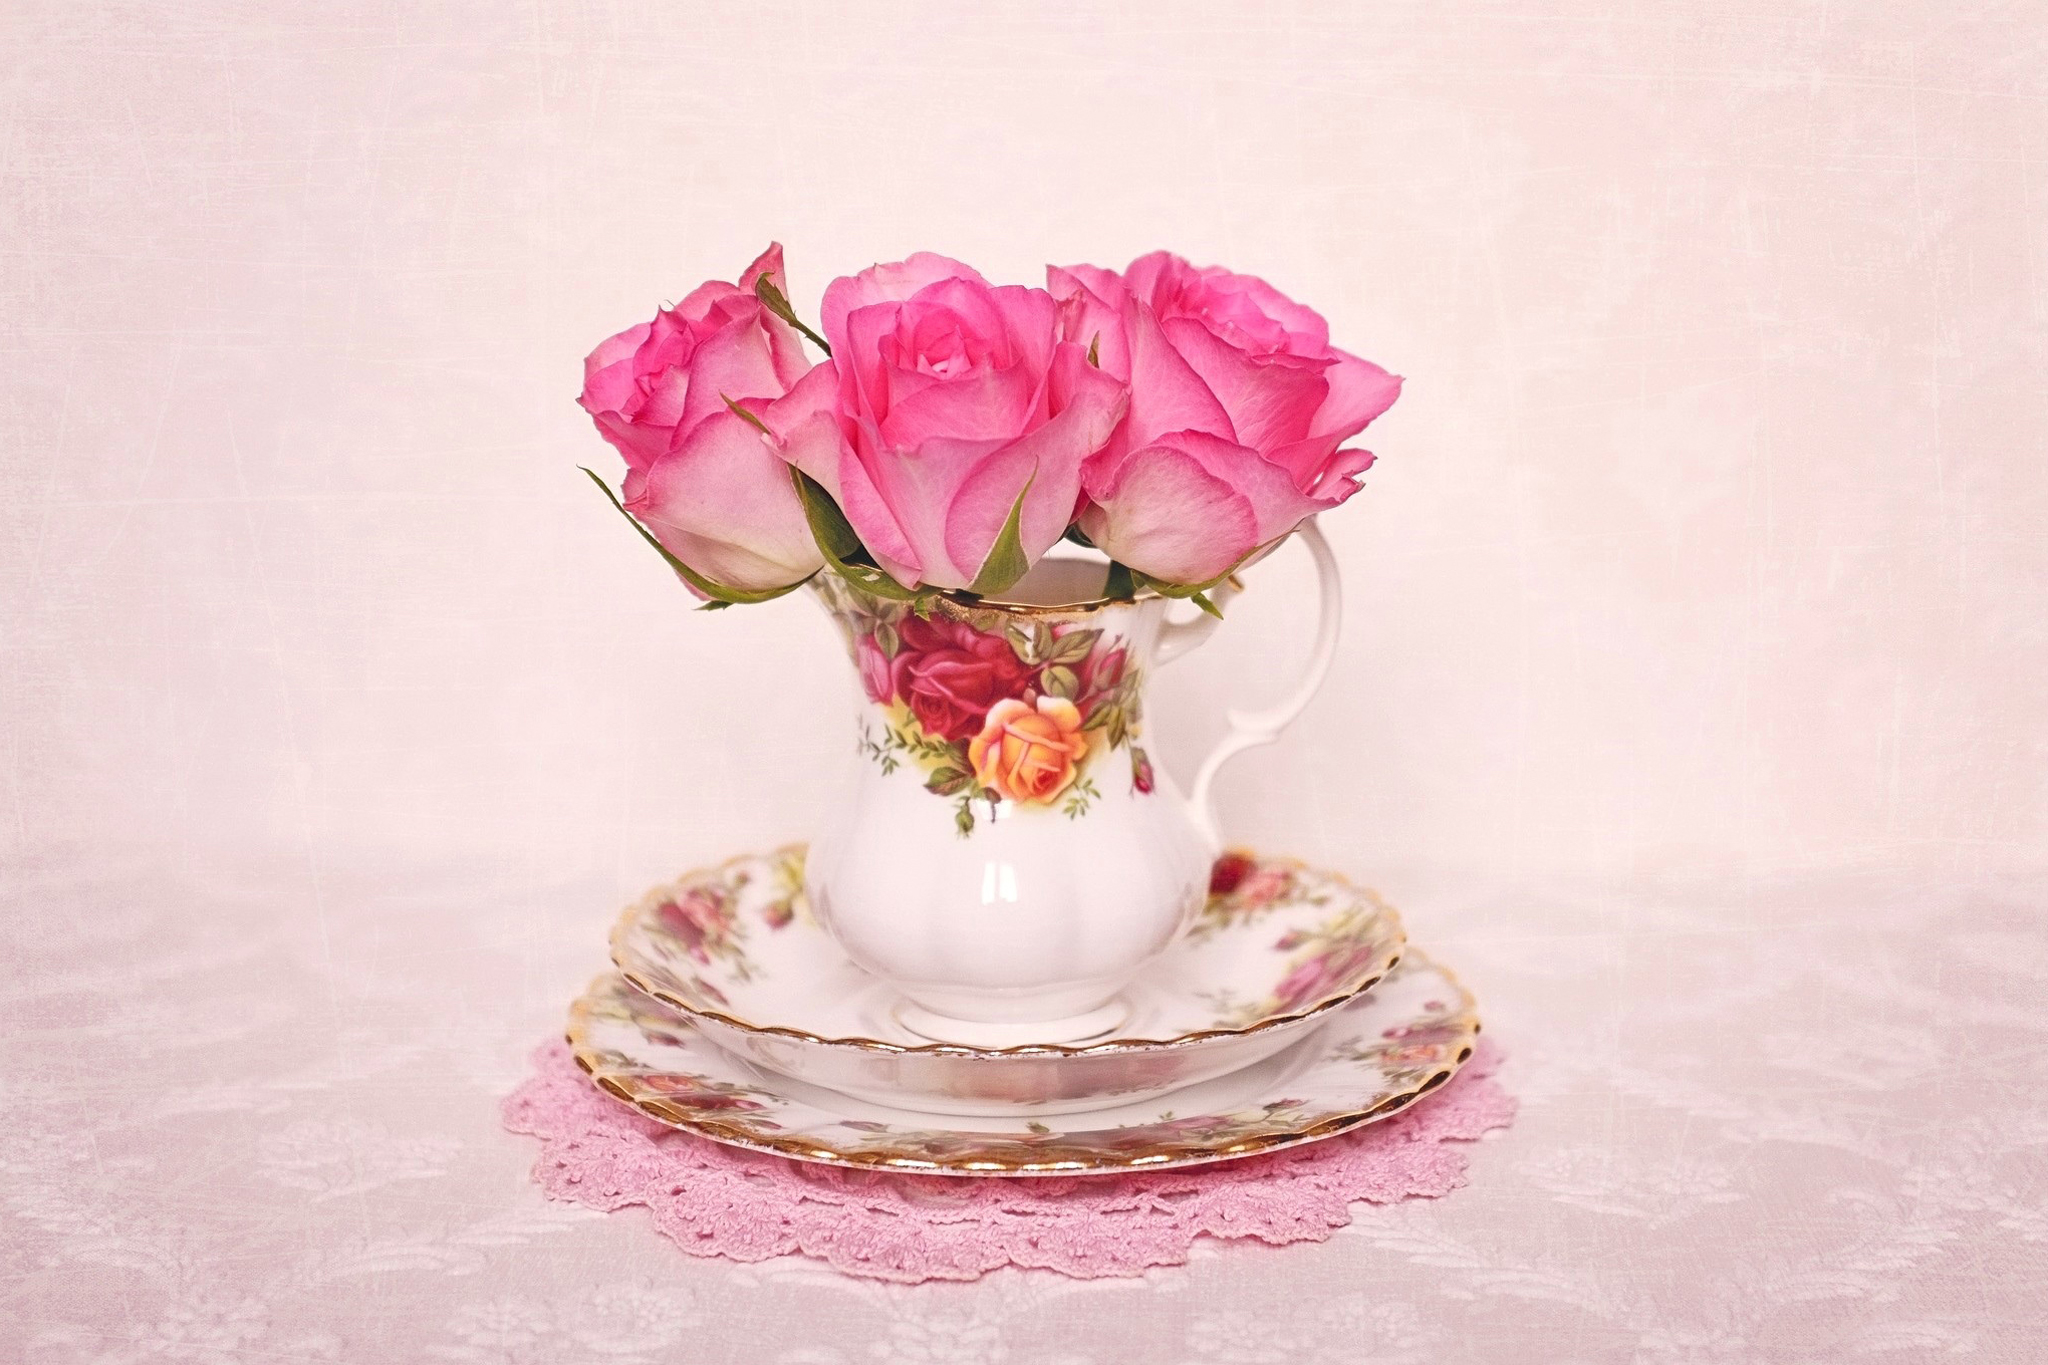 photography, still life, cup, pink flower, rose, saucer